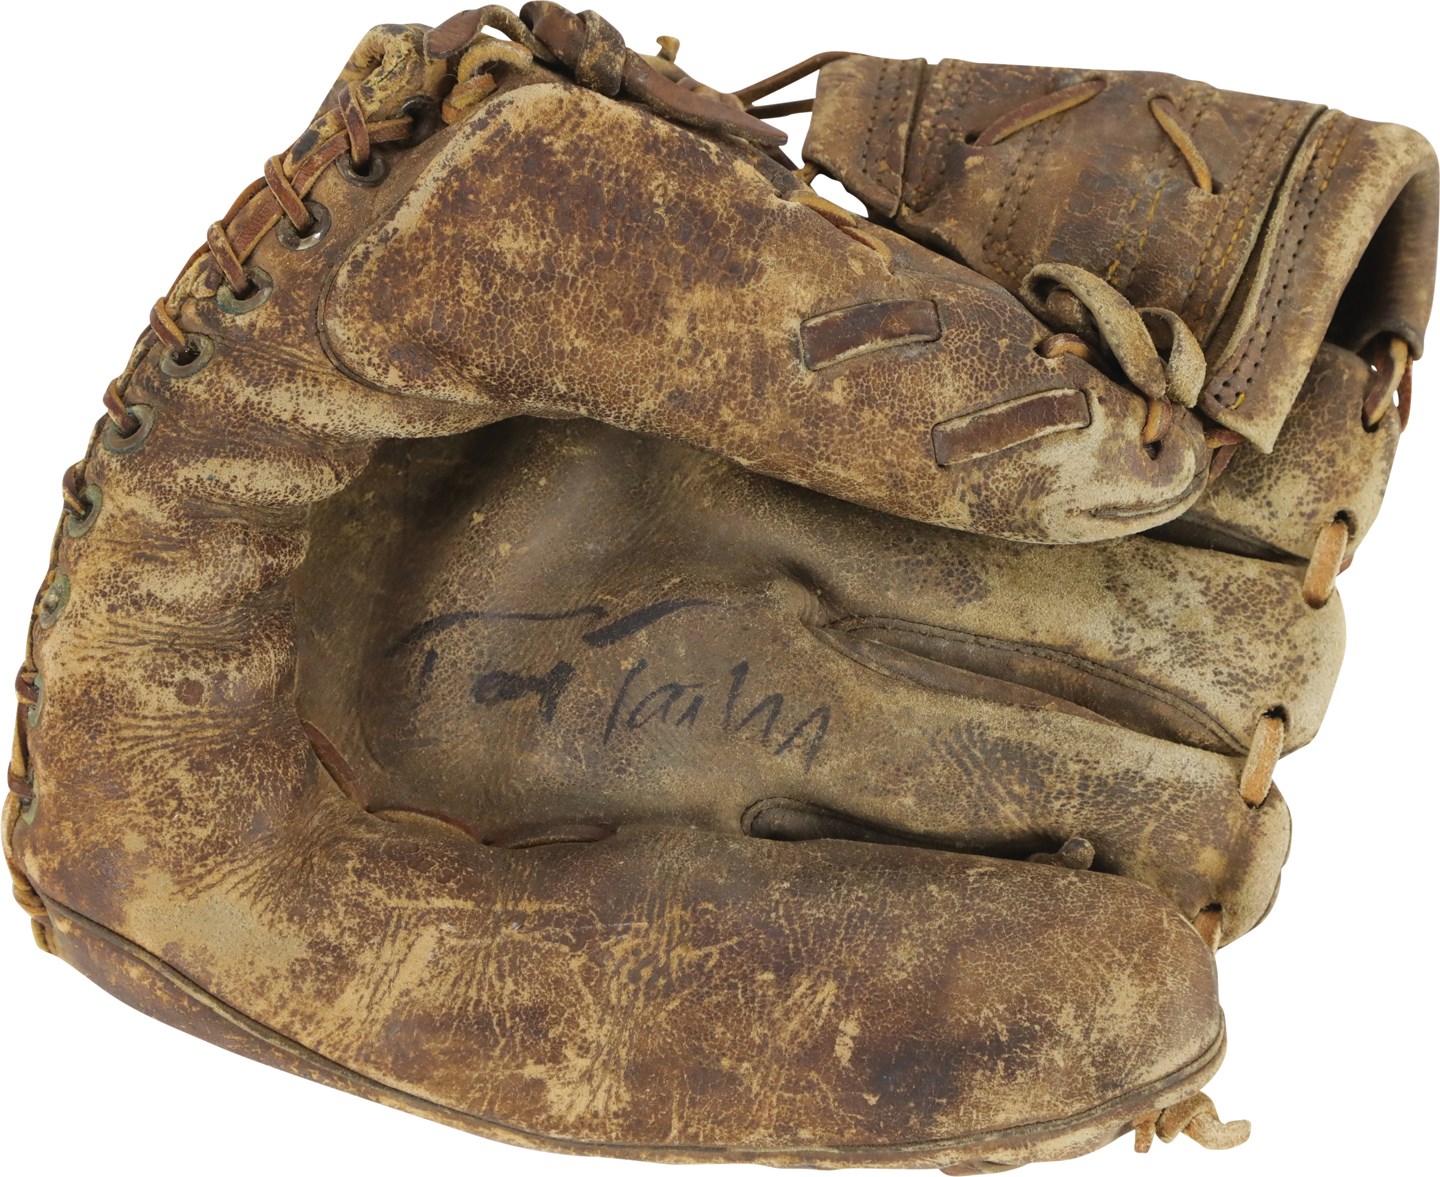 Baseball Equipment - Tony Taylor Autographed Glove Given to Willie Montanez